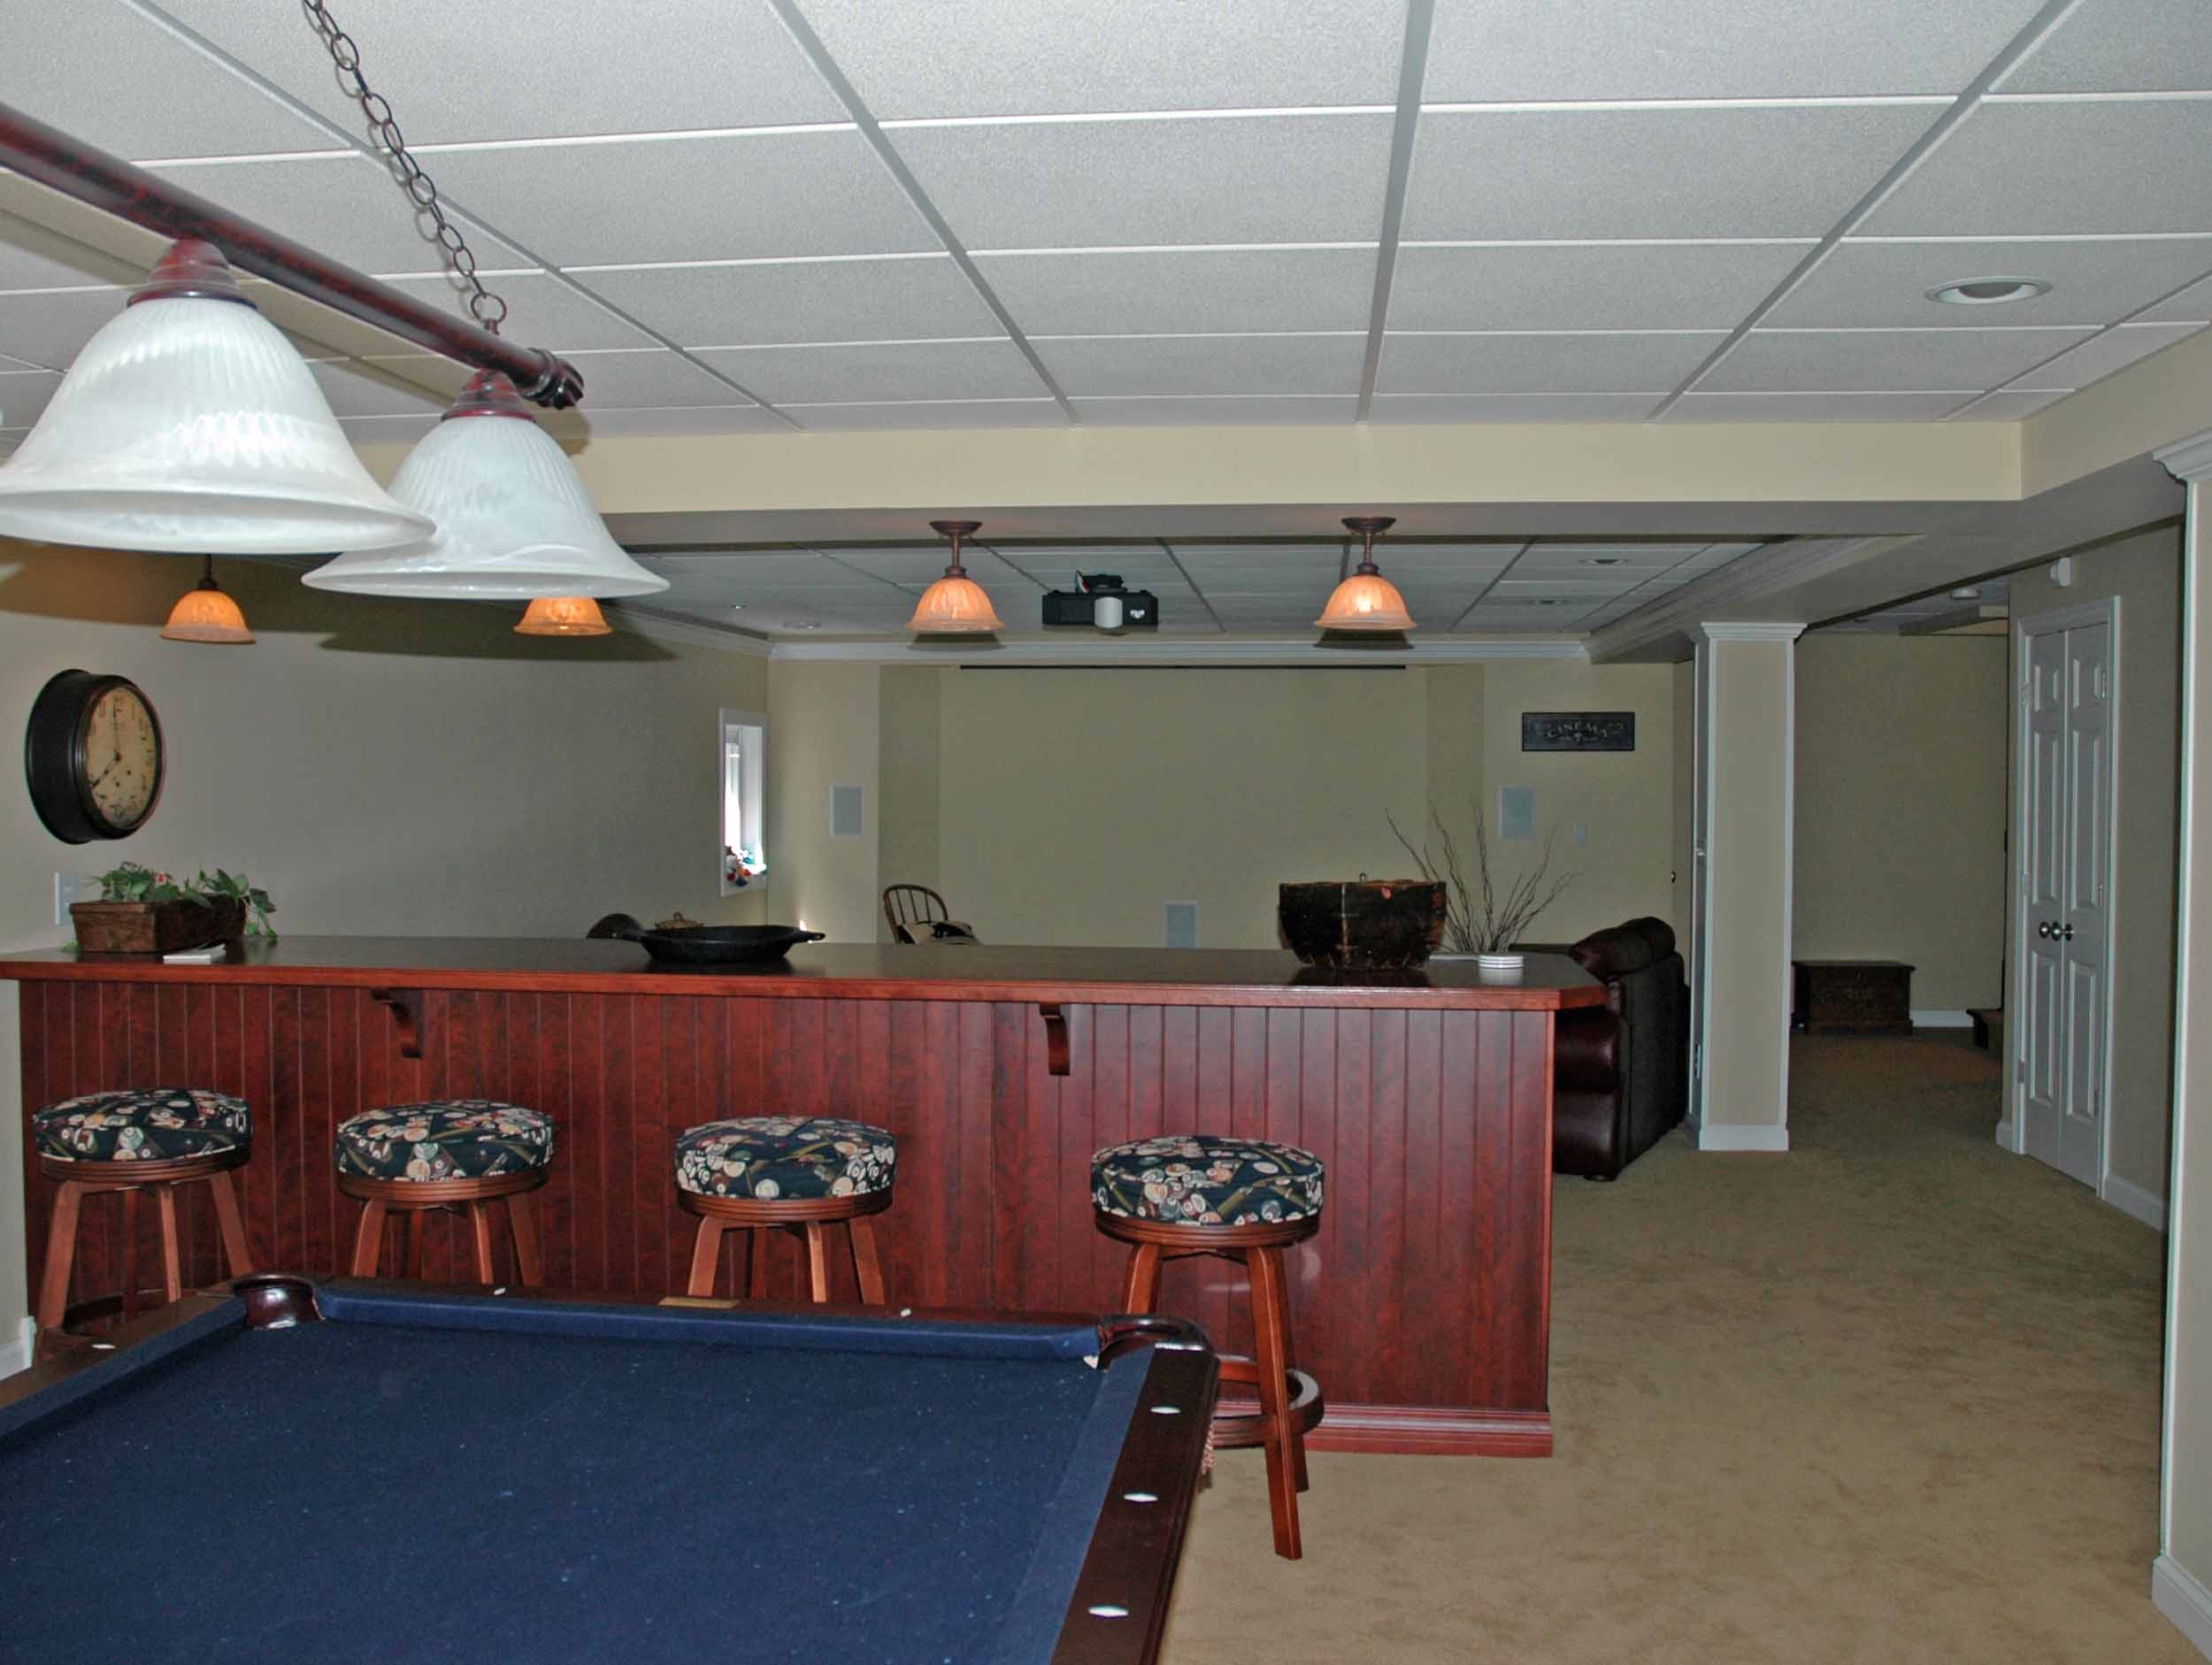 Ceiling Tiles Basement Remodelingdecor tips basement remodeling costs with pool table and